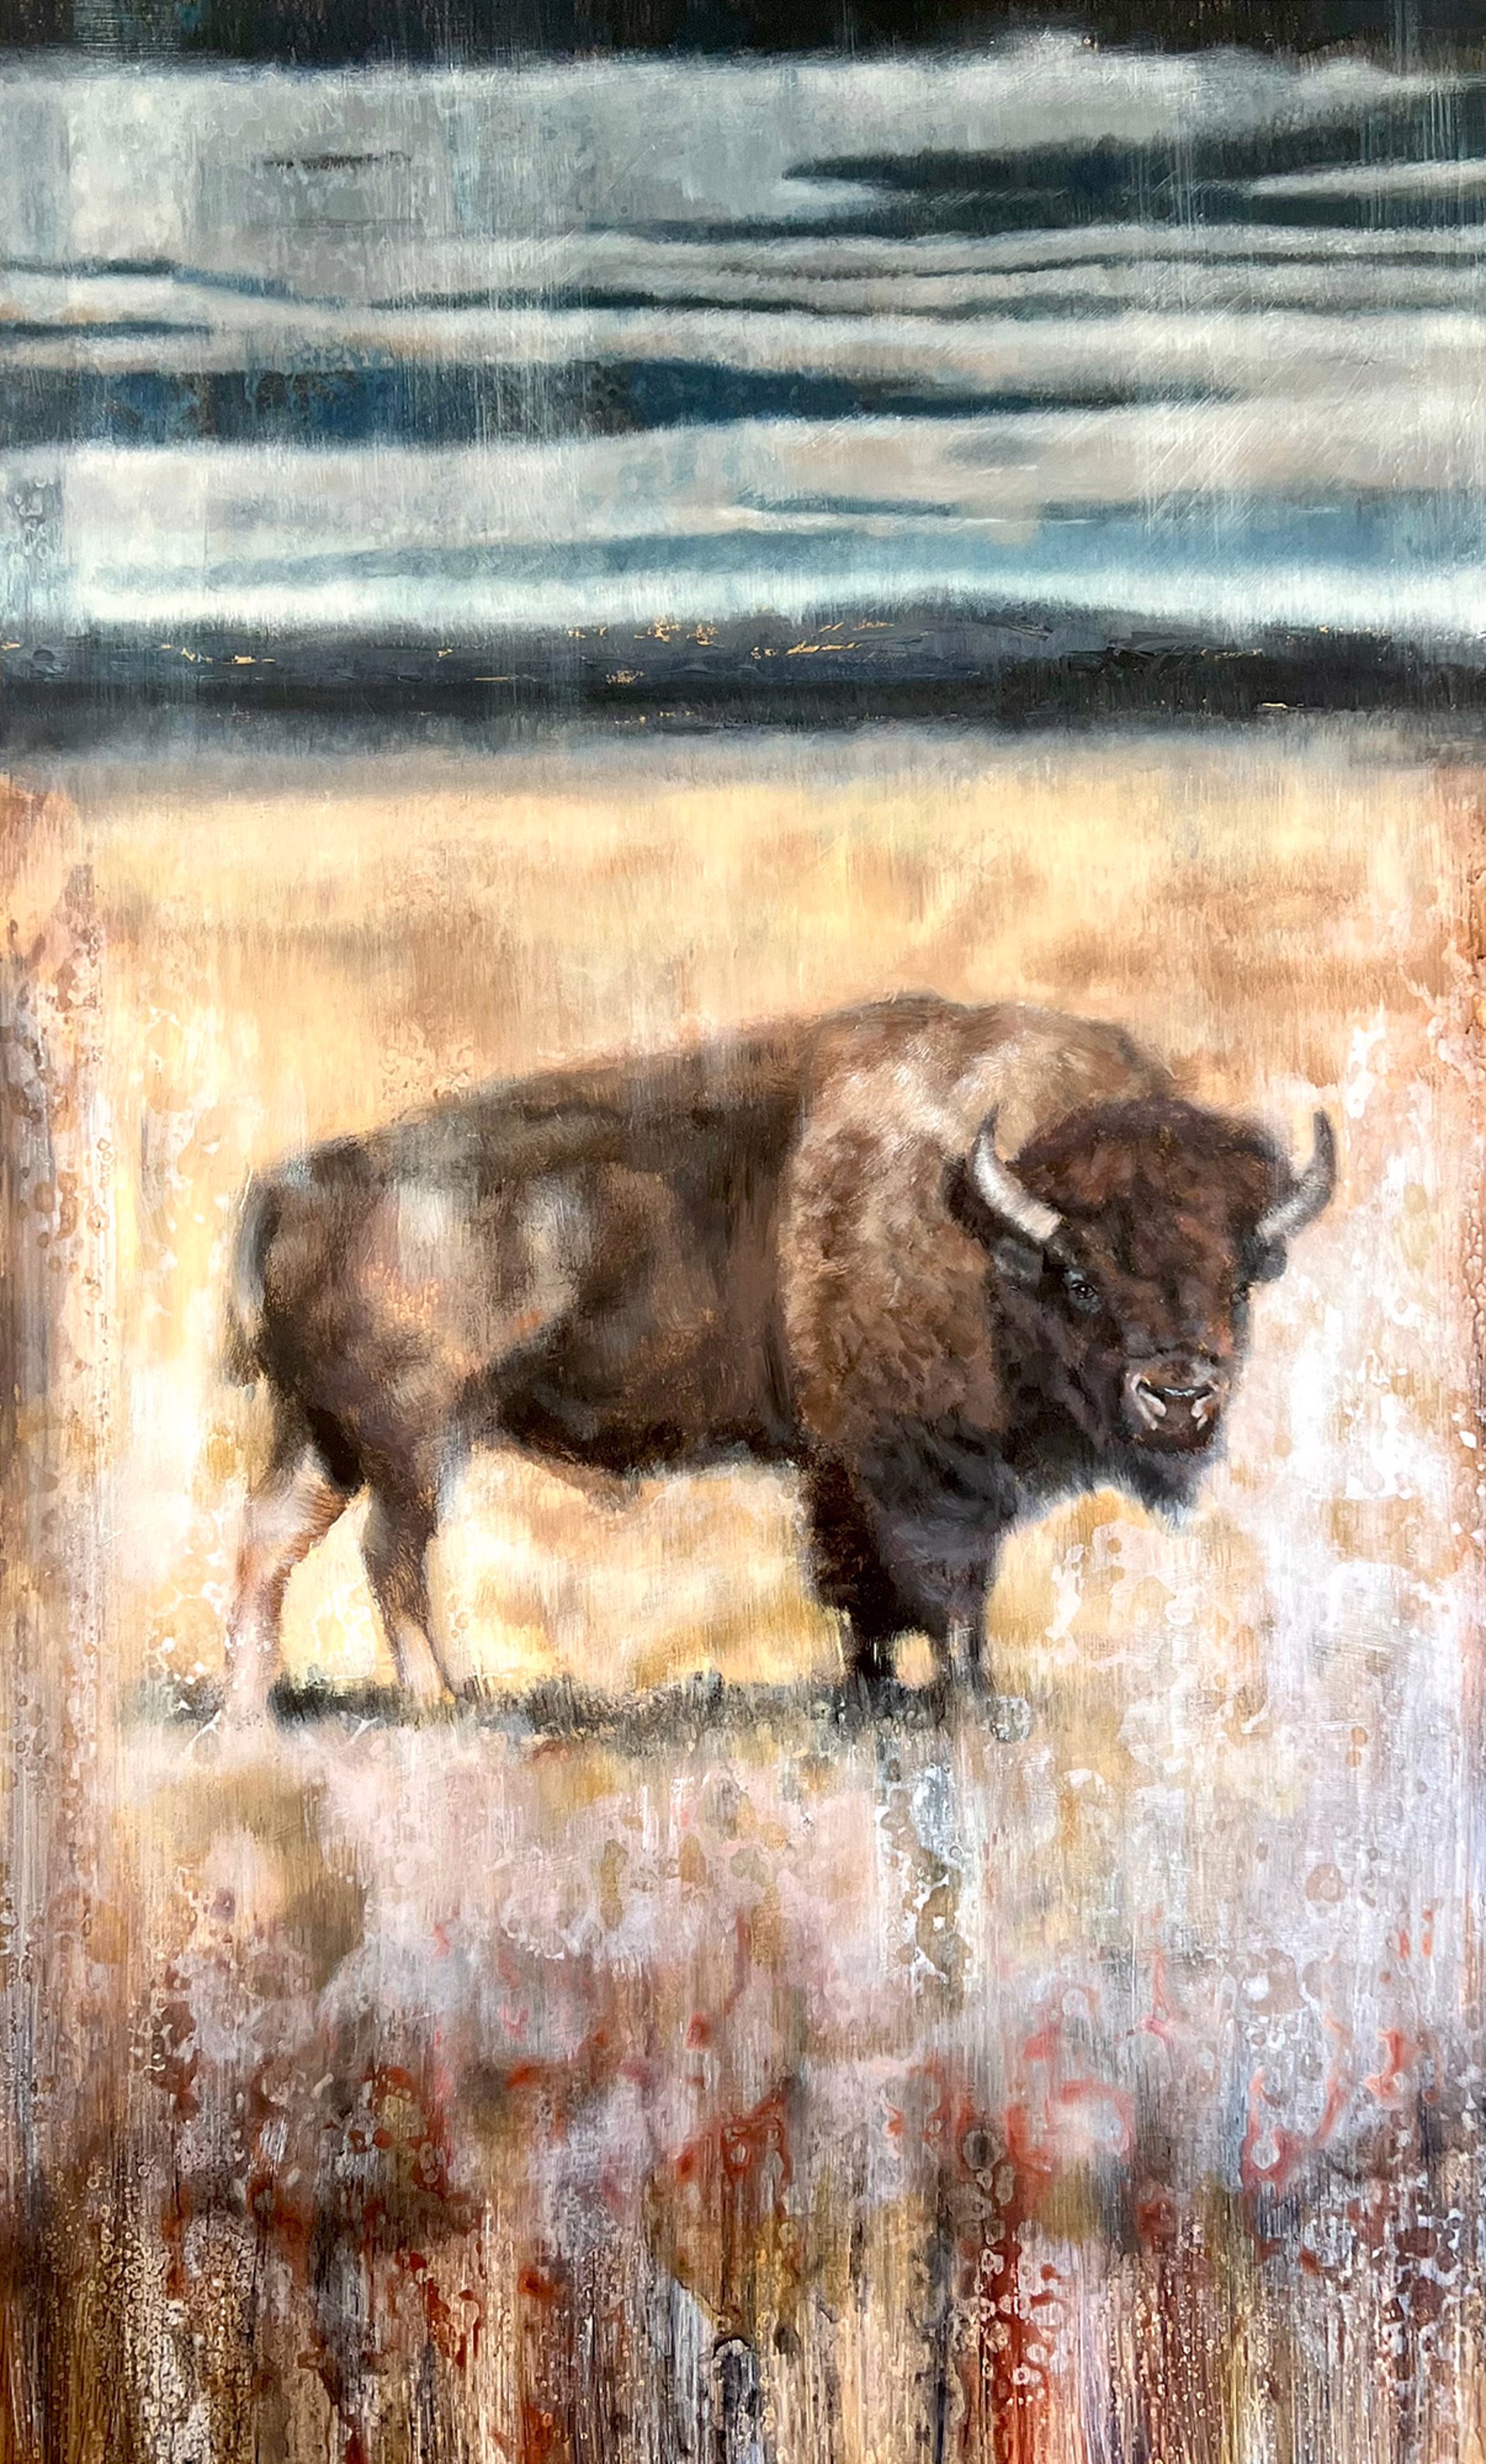 Original Oil Painting By Nealy Riley Of Bison In Field With An Abstract Background